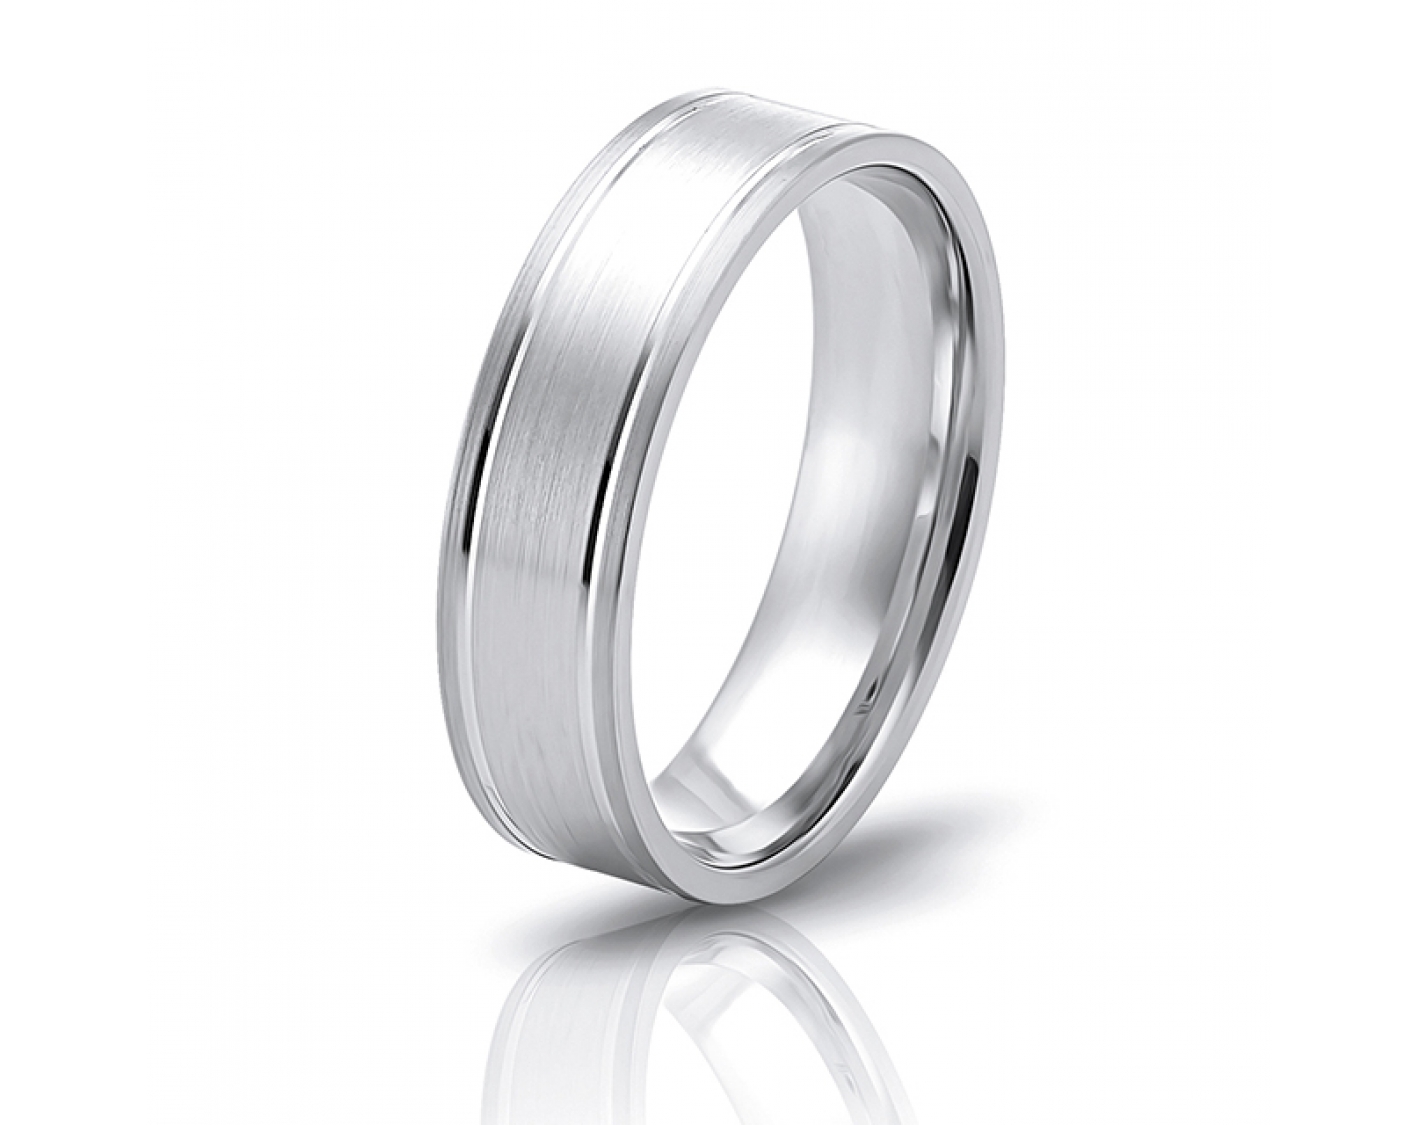 18k white gold 6mm two-toned* matte wedding band with colored edges